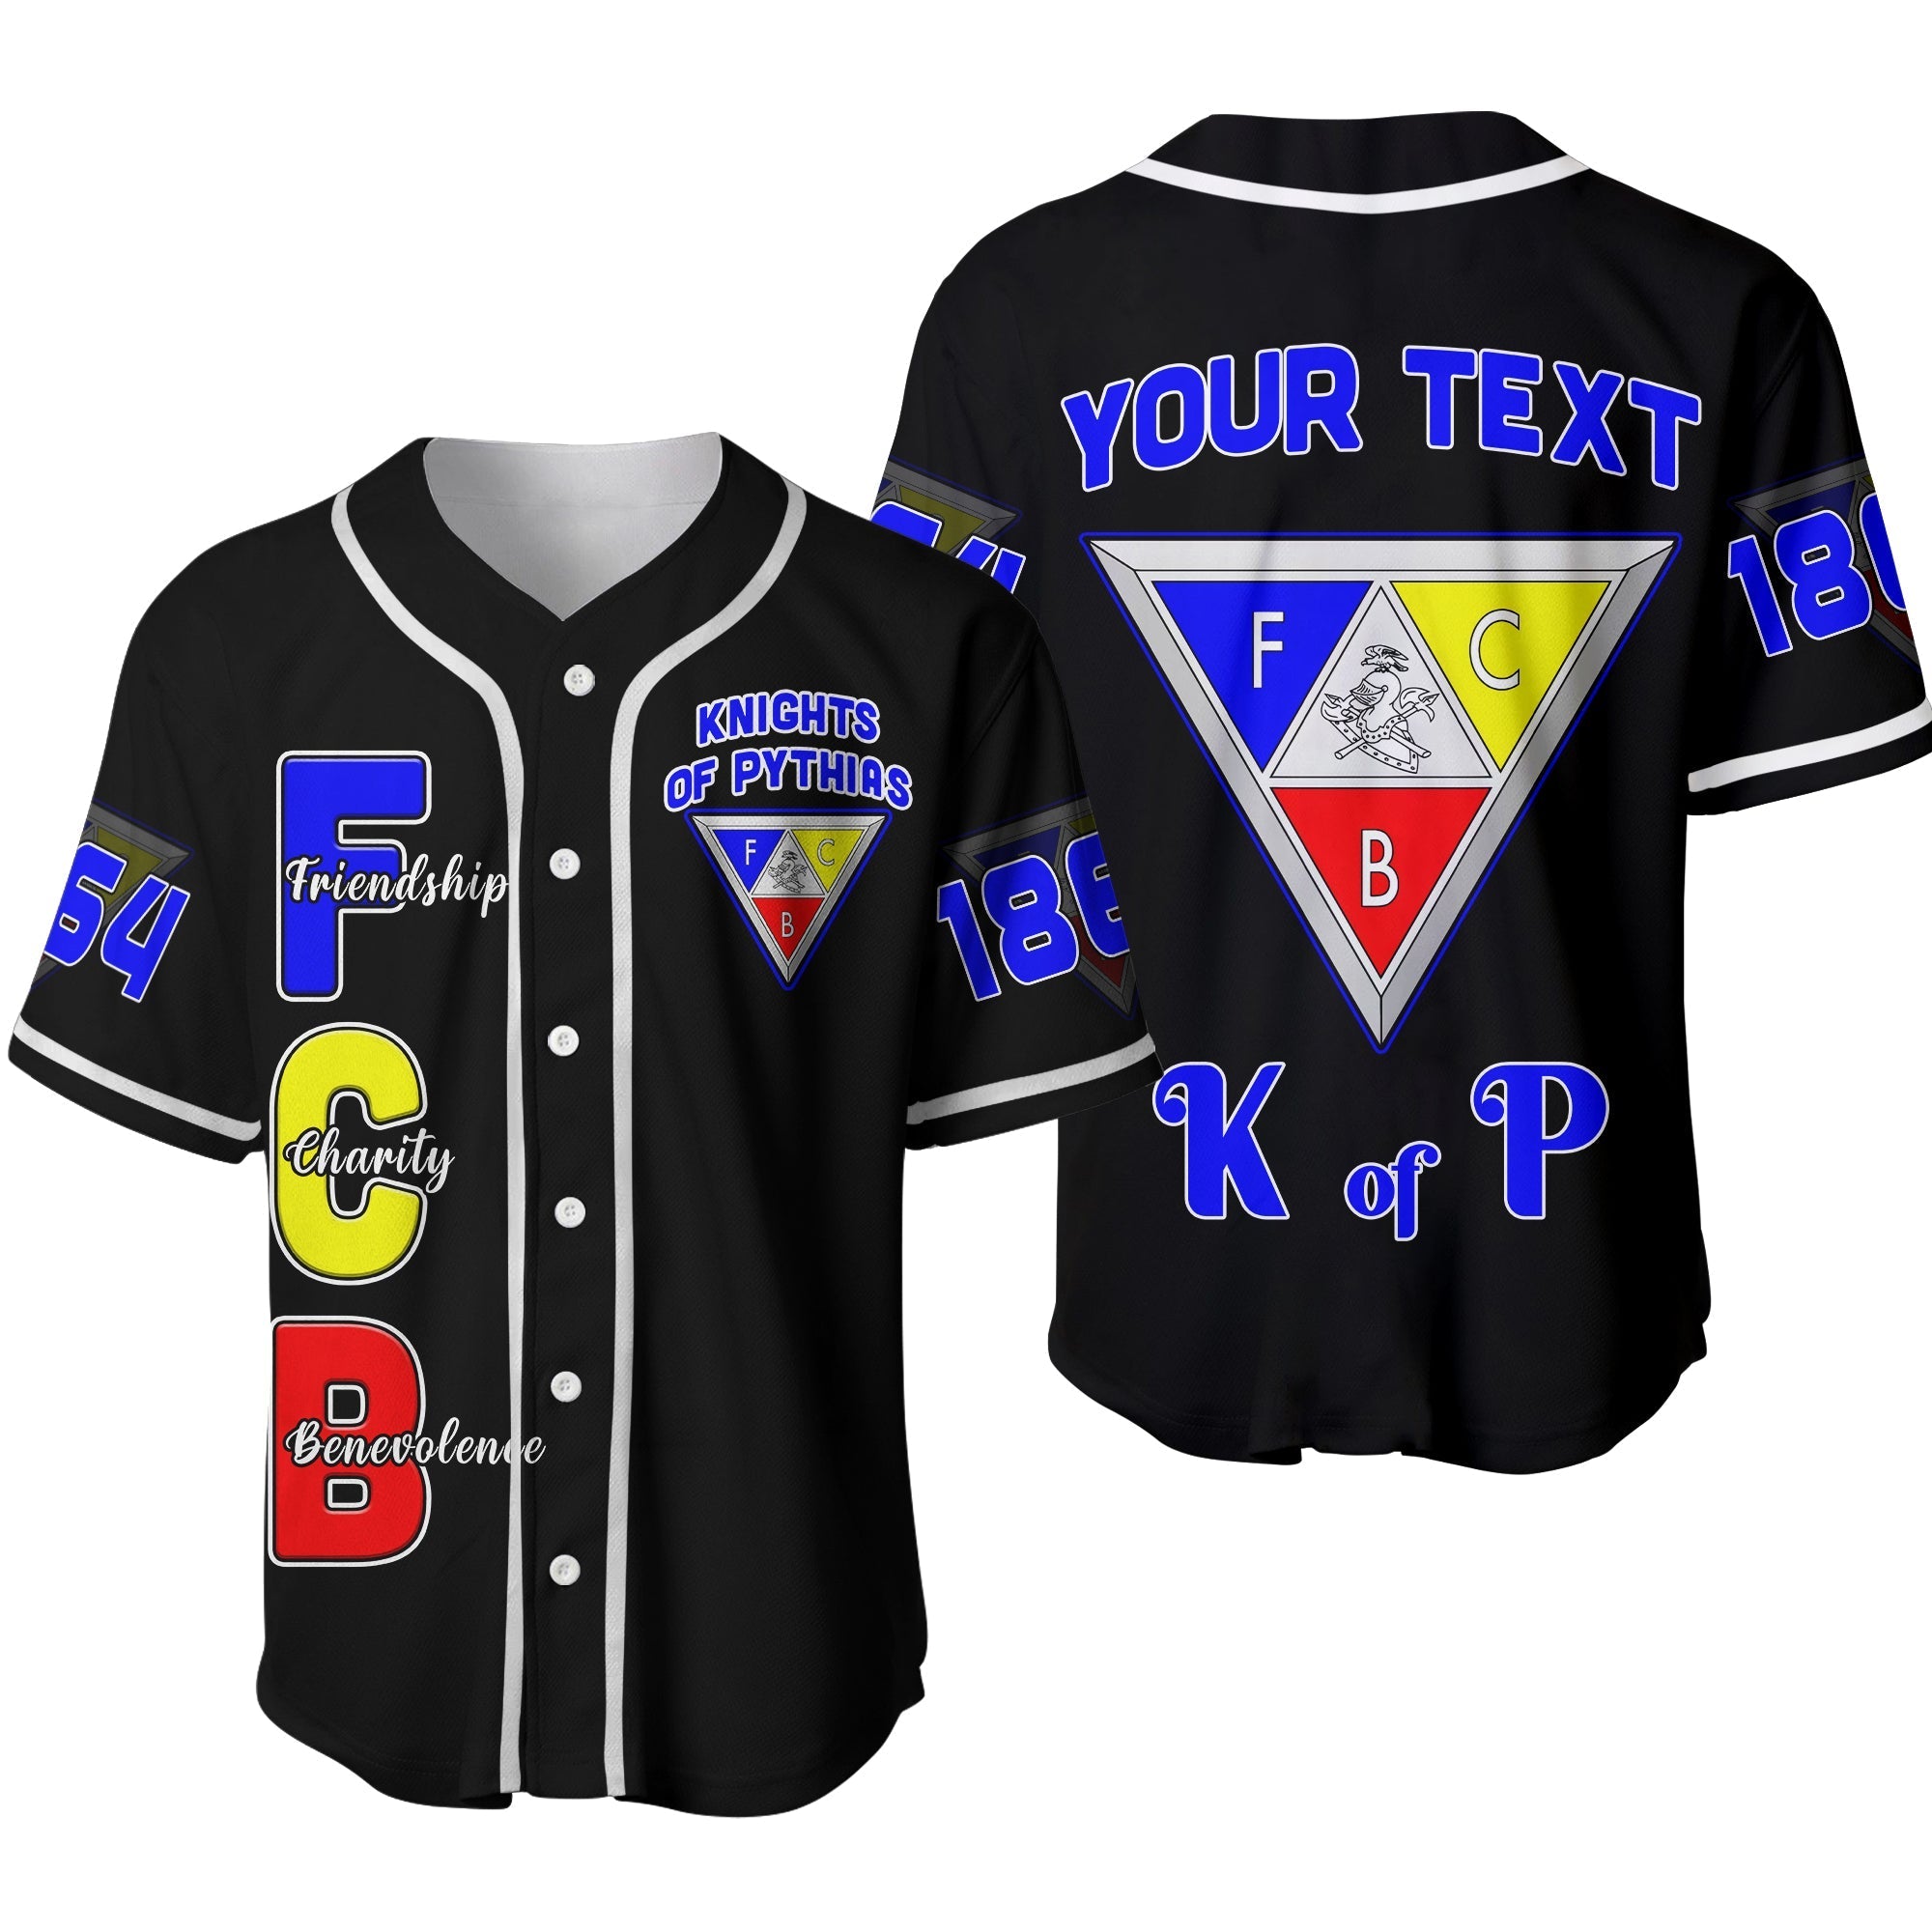 custom-personalise-knights-of-pythias-baseball-jersey-since-1864-simple-style-ver02